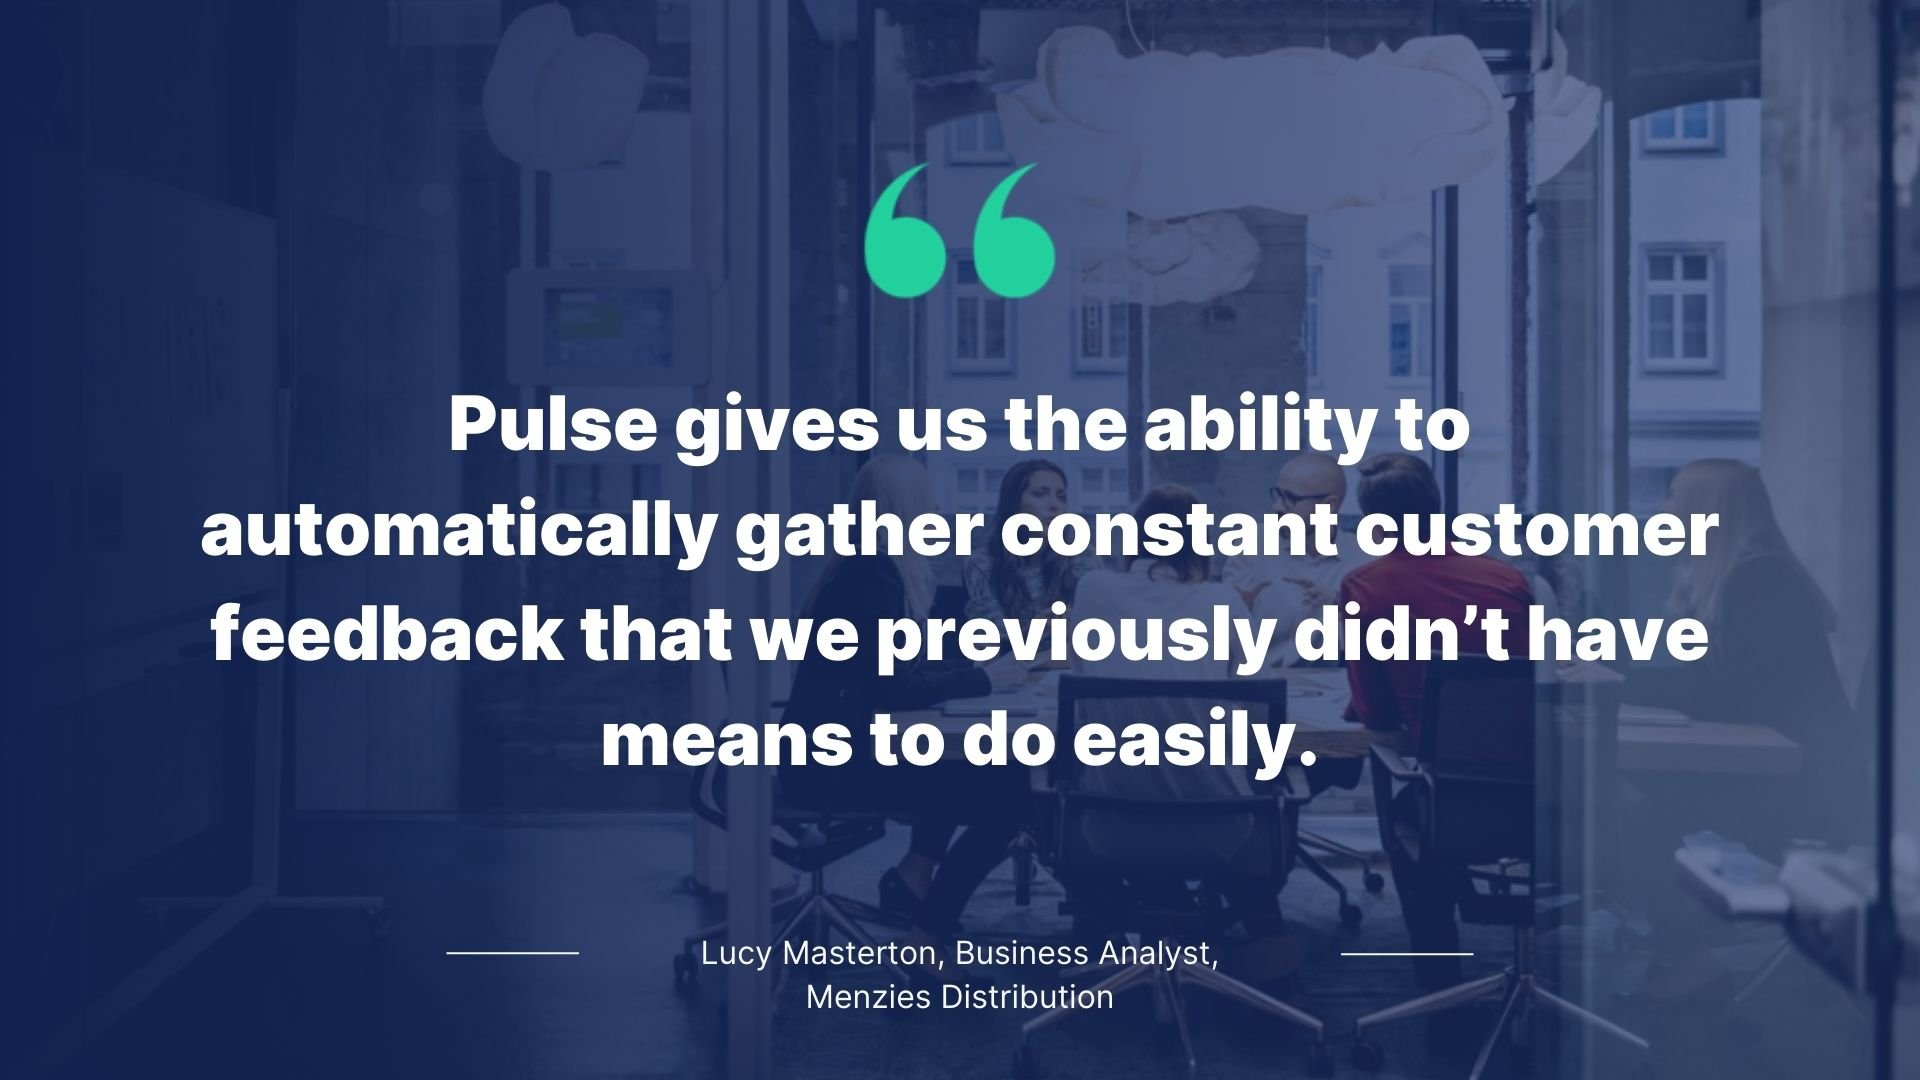 Quote by Lucy Masterton, Business Analyst, Menzies Distribution: Pulse gives us the ability to automatically gather constant customer feedback that we previously didn't have the means to do easily.